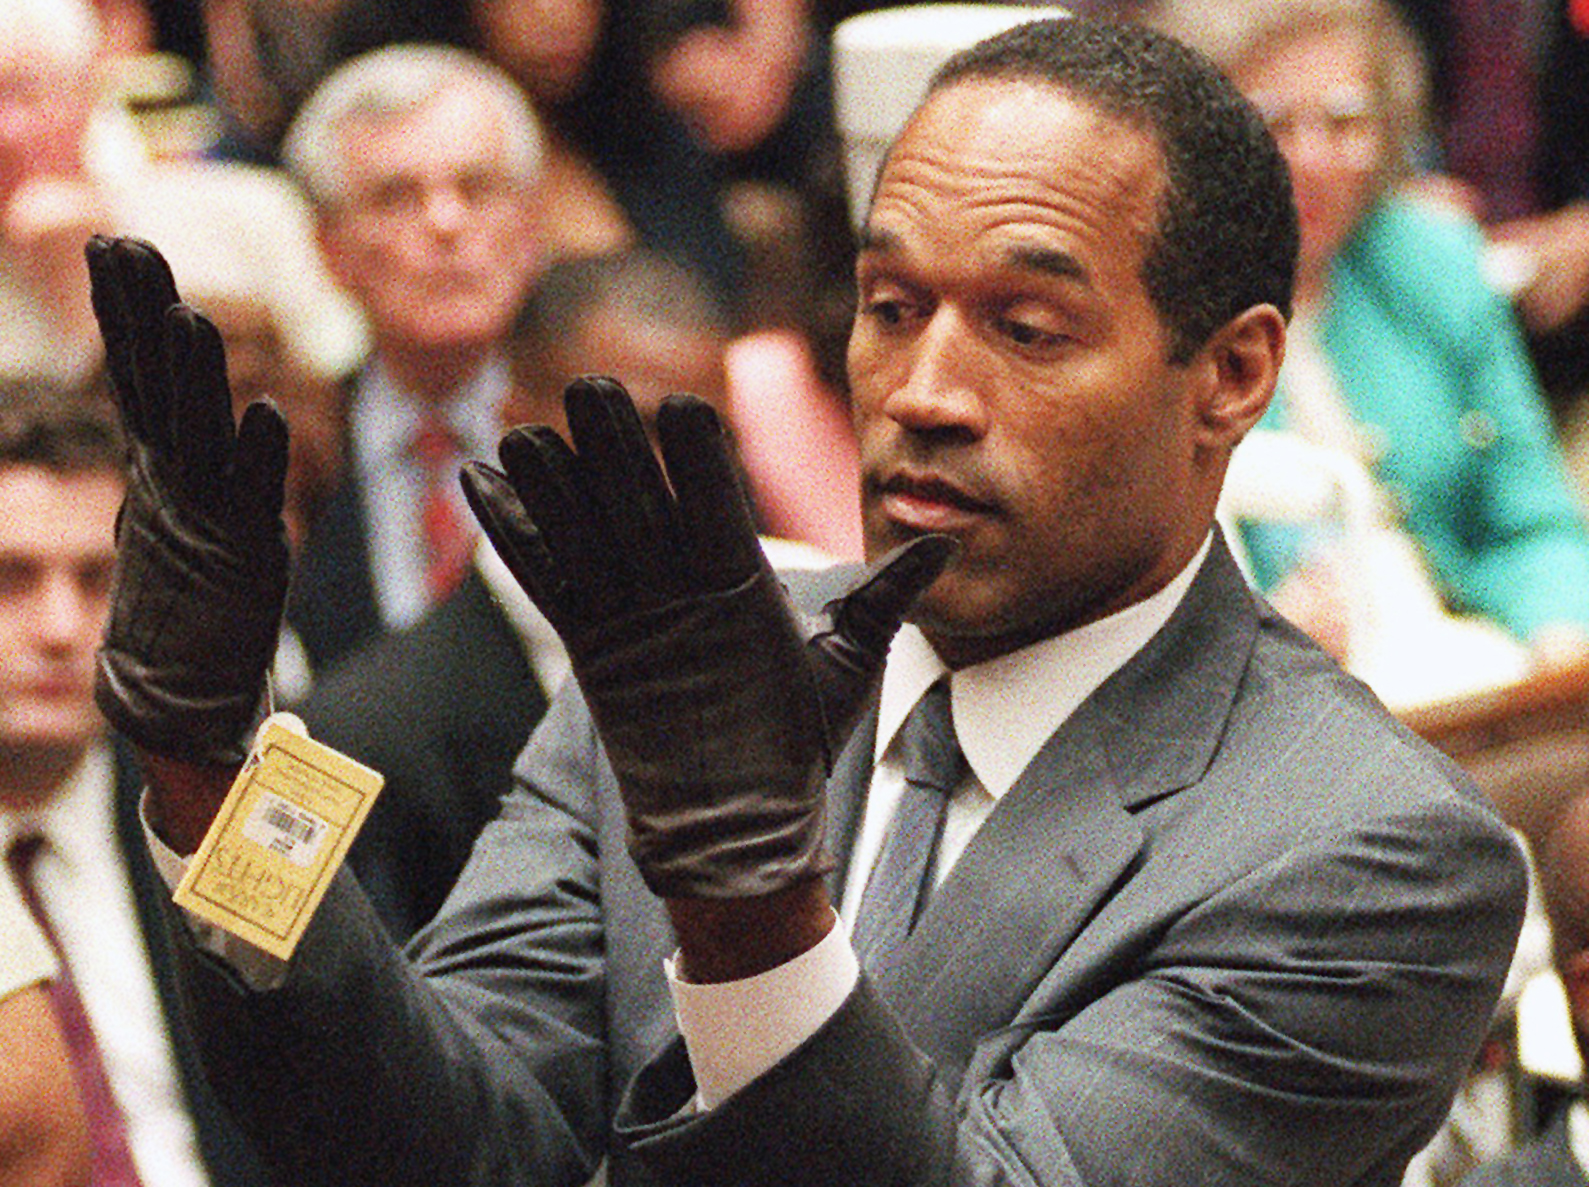 O.J. Simpson Net Worth: First Interview Will Cost $5 Million